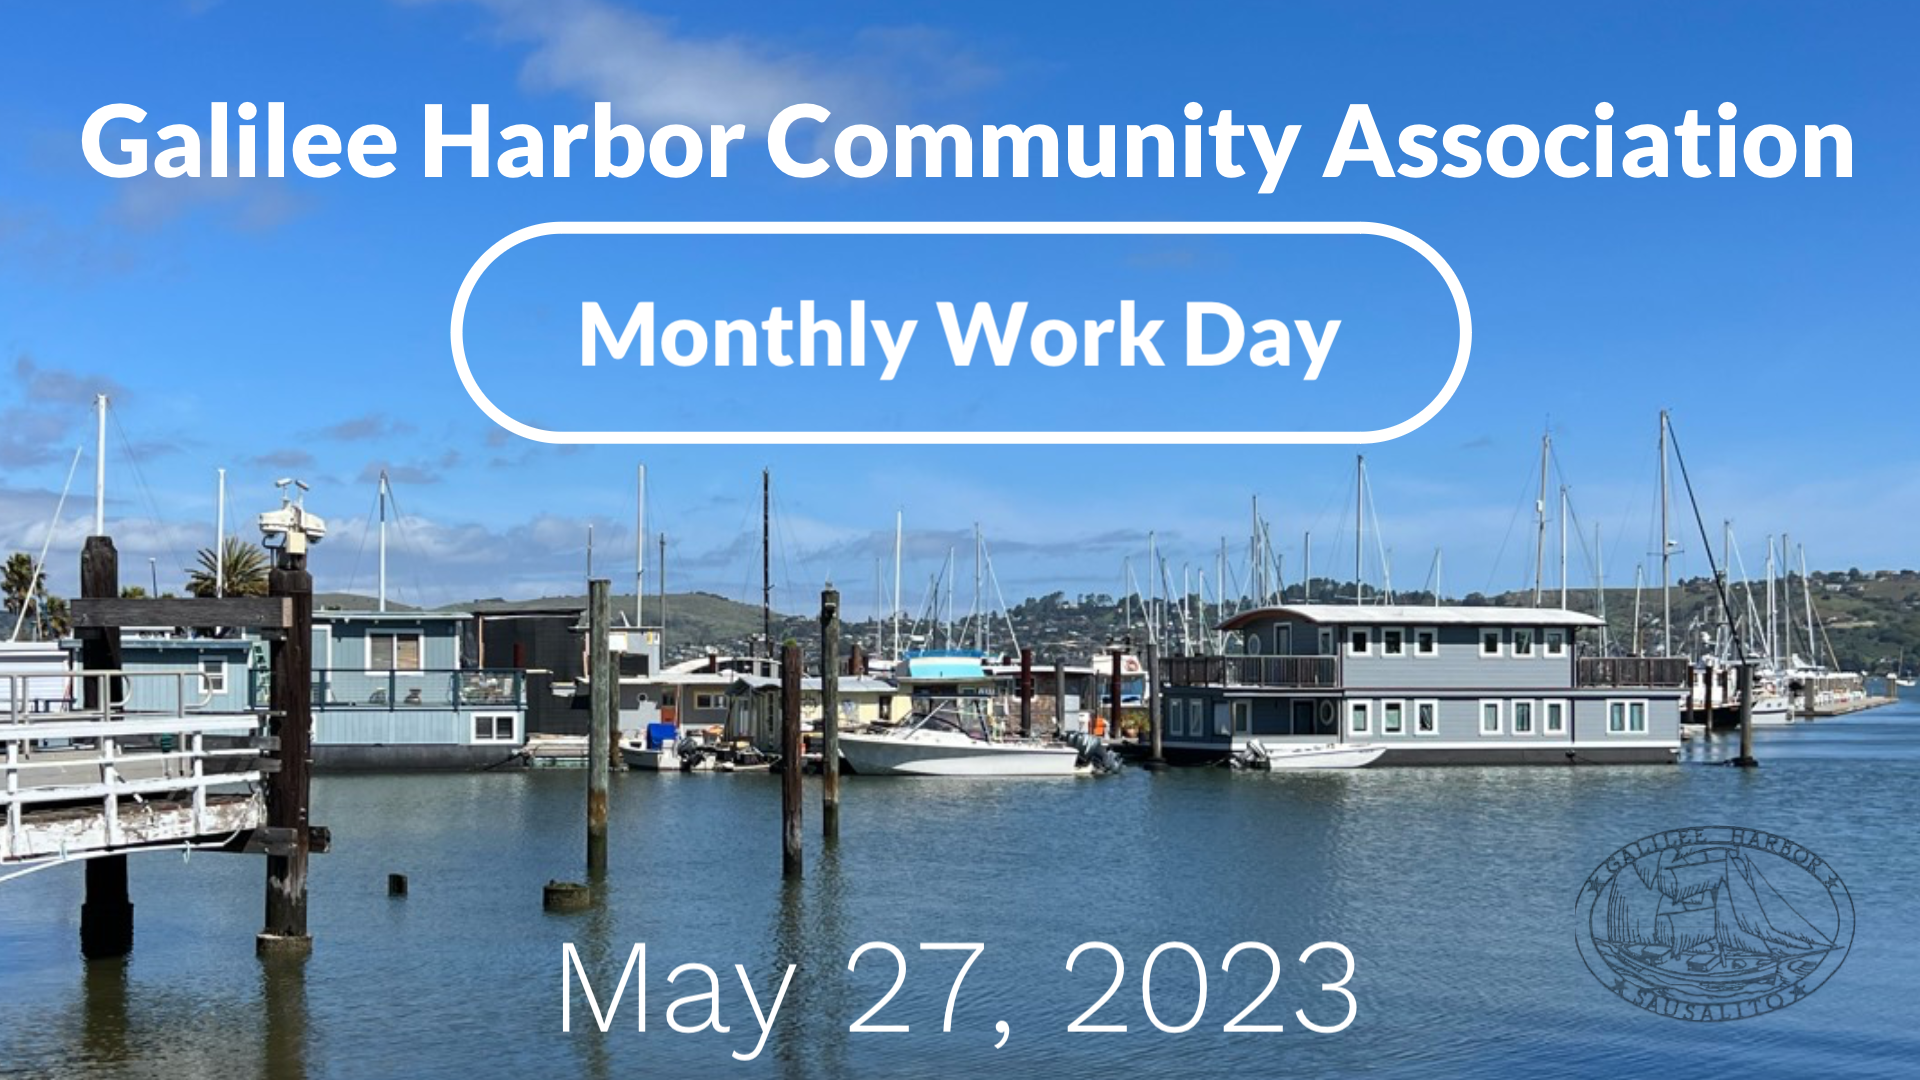 Galilee Harbor Community Association Monthly Work Day May 27, 2023